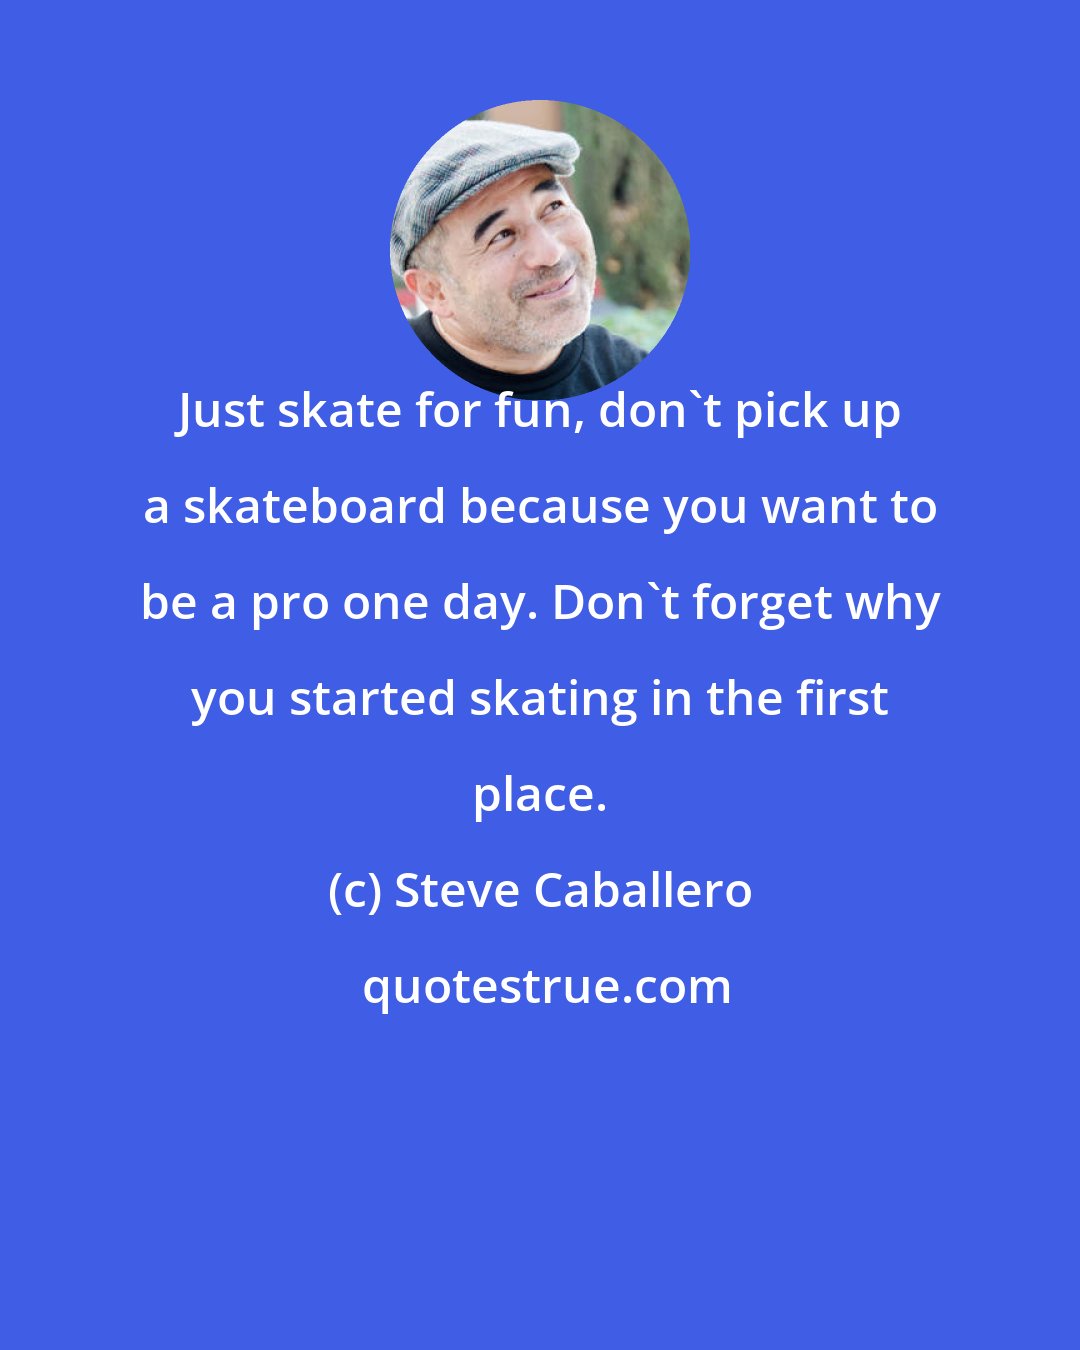 Steve Caballero: Just skate for fun, don't pick up a skateboard because you want to be a pro one day. Don't forget why you started skating in the first place.